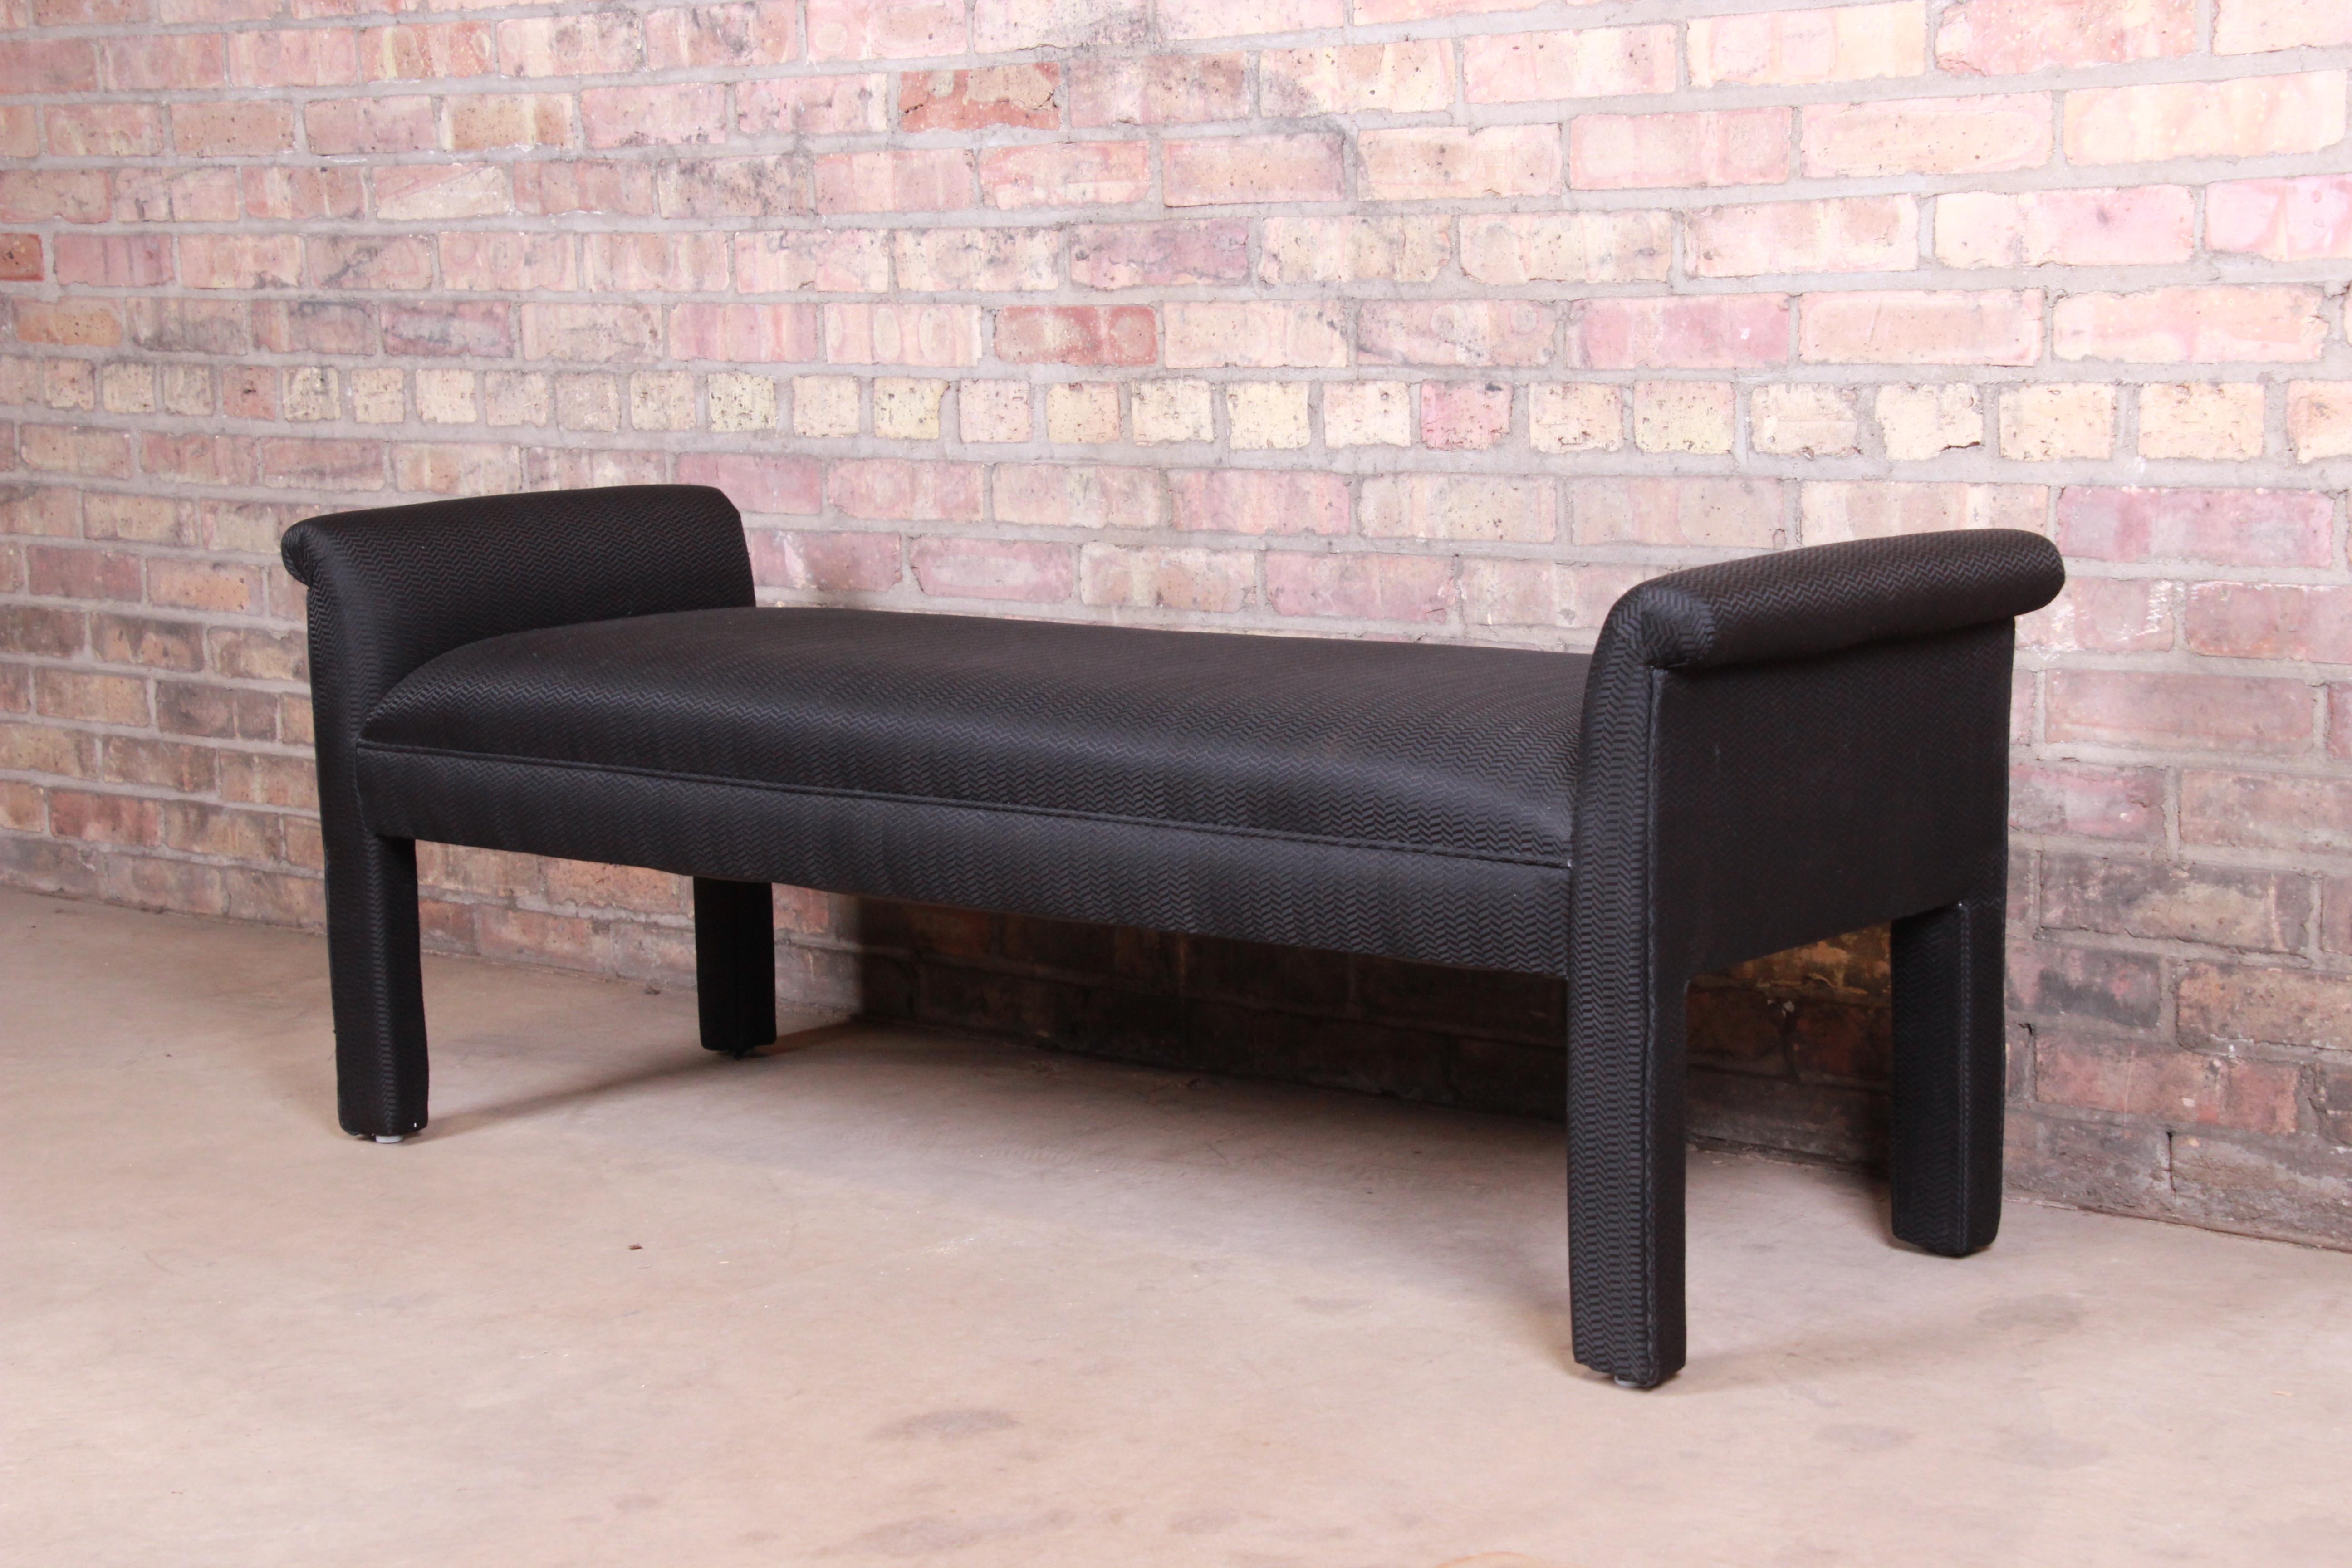 American Mid-Century Modern Parsons Upholstered Window Bench